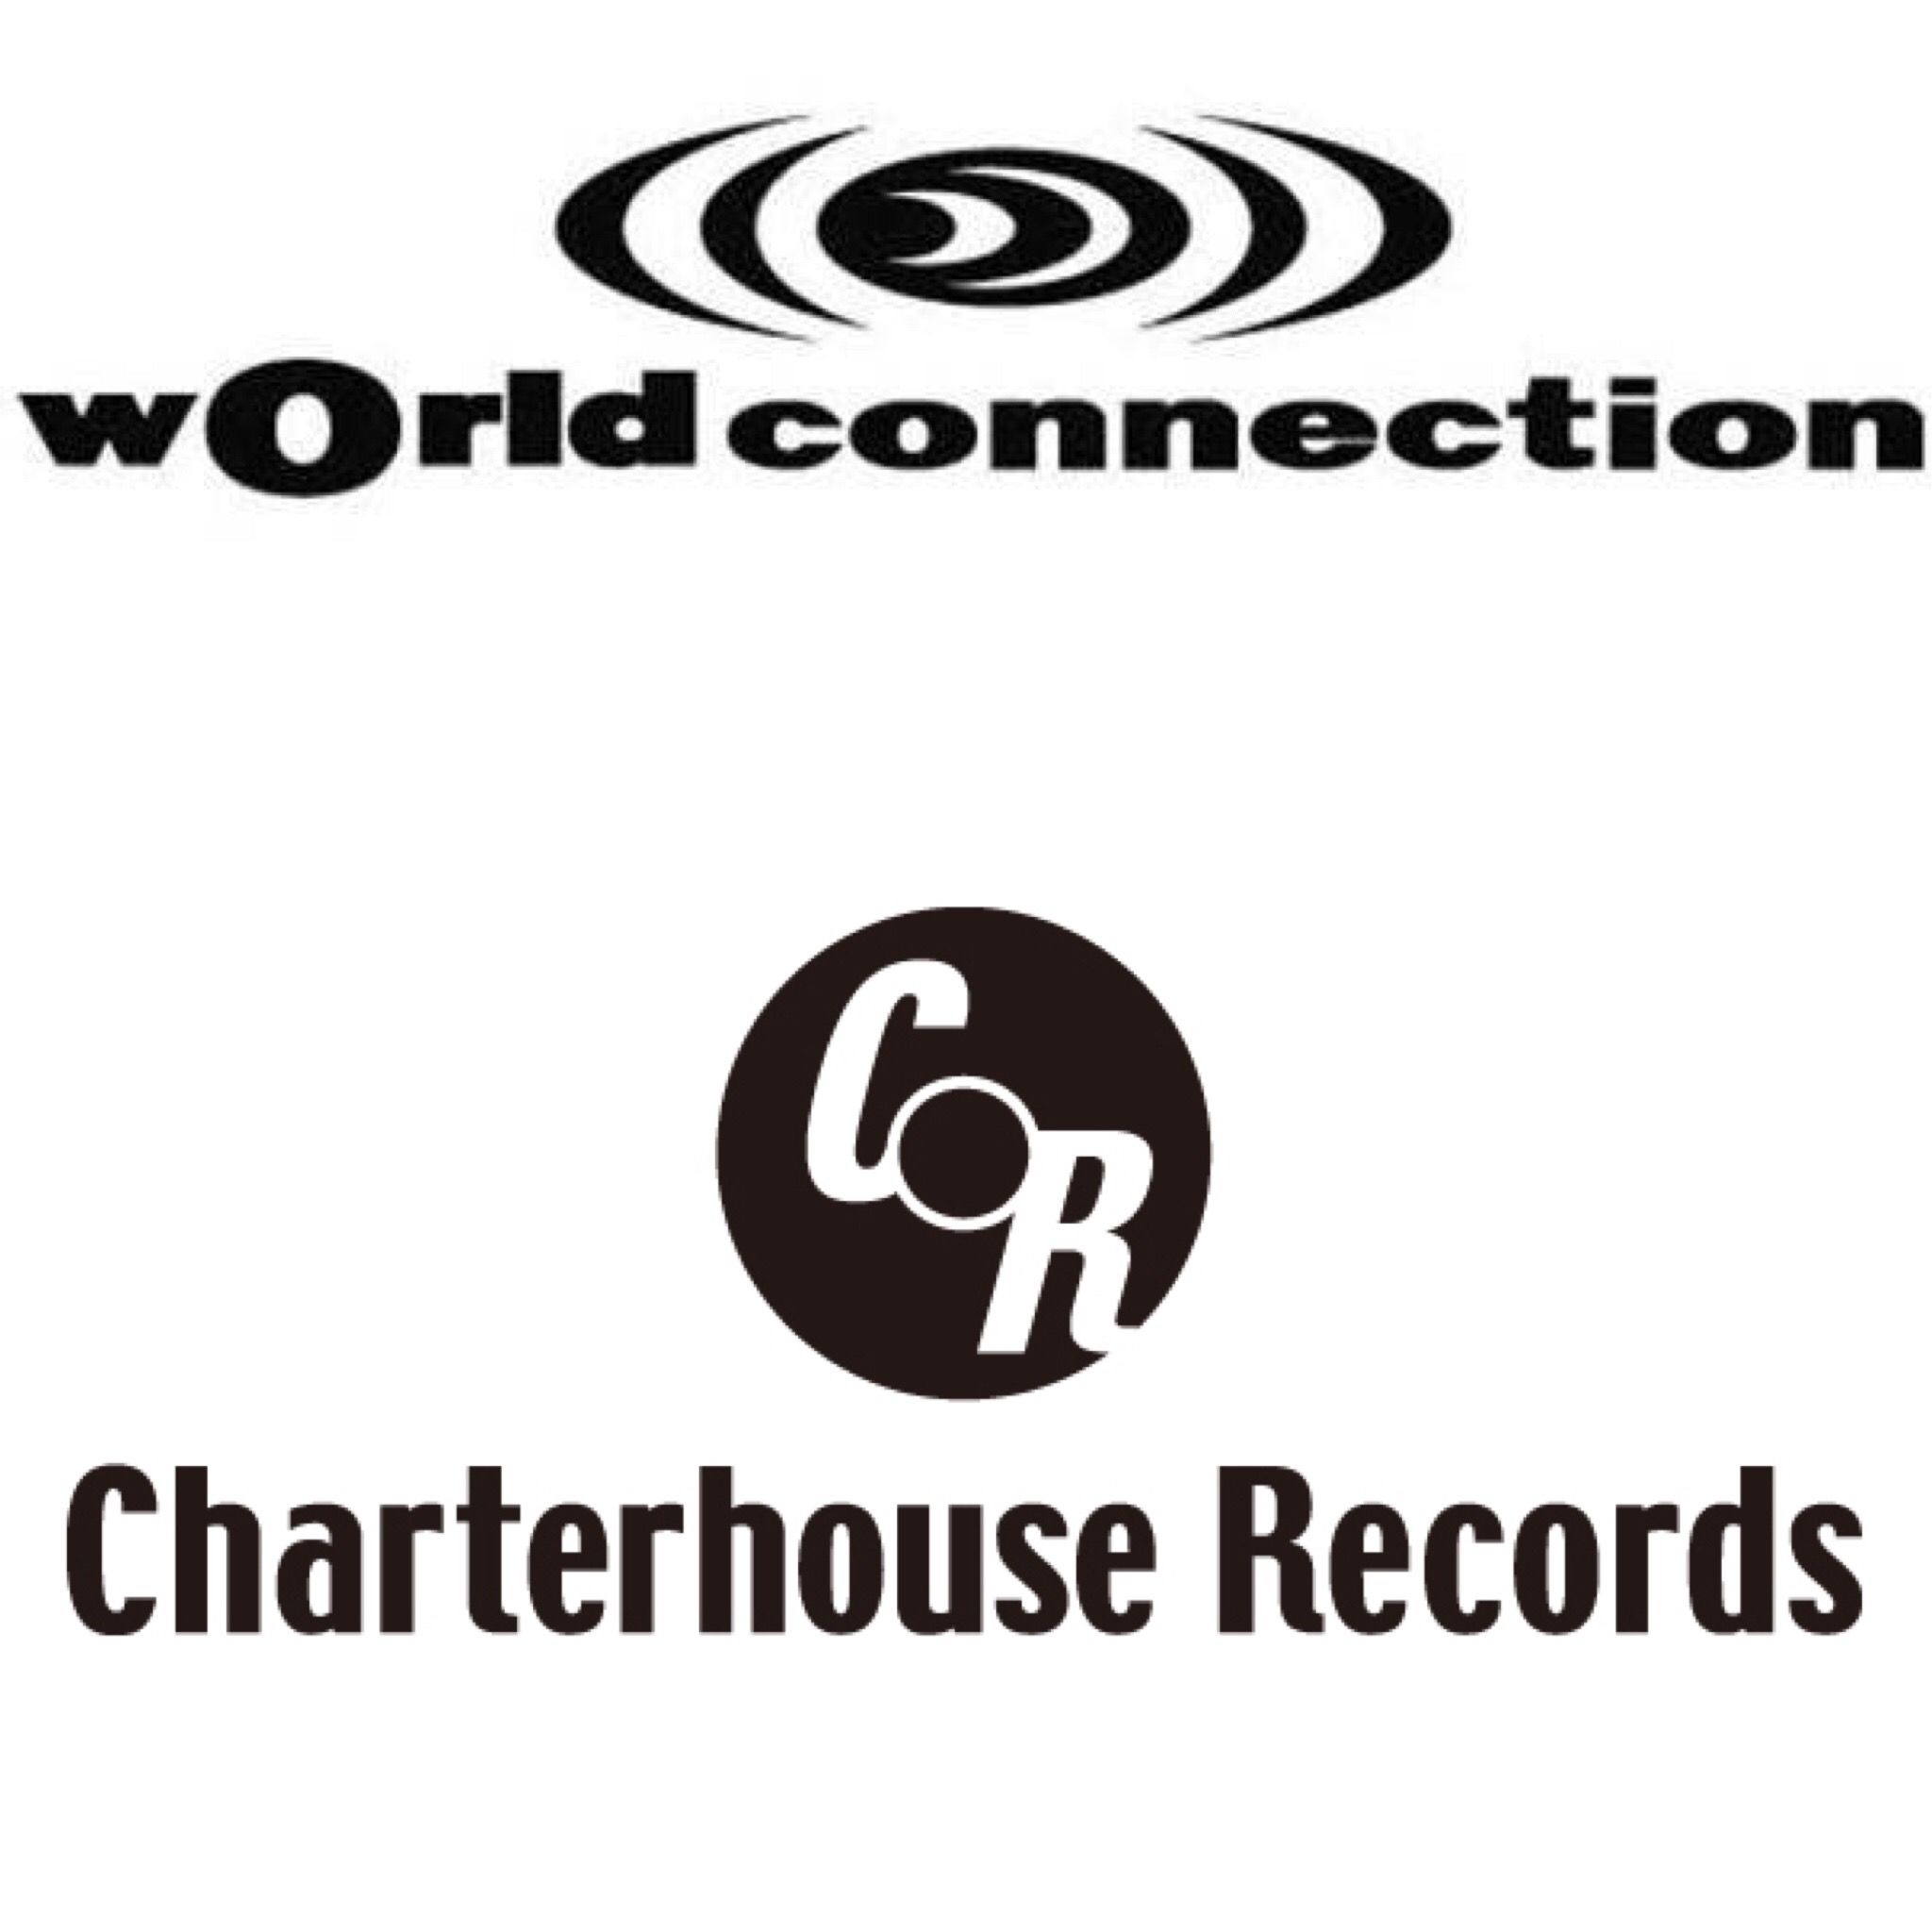 World Connection ”Charterhouse Records”